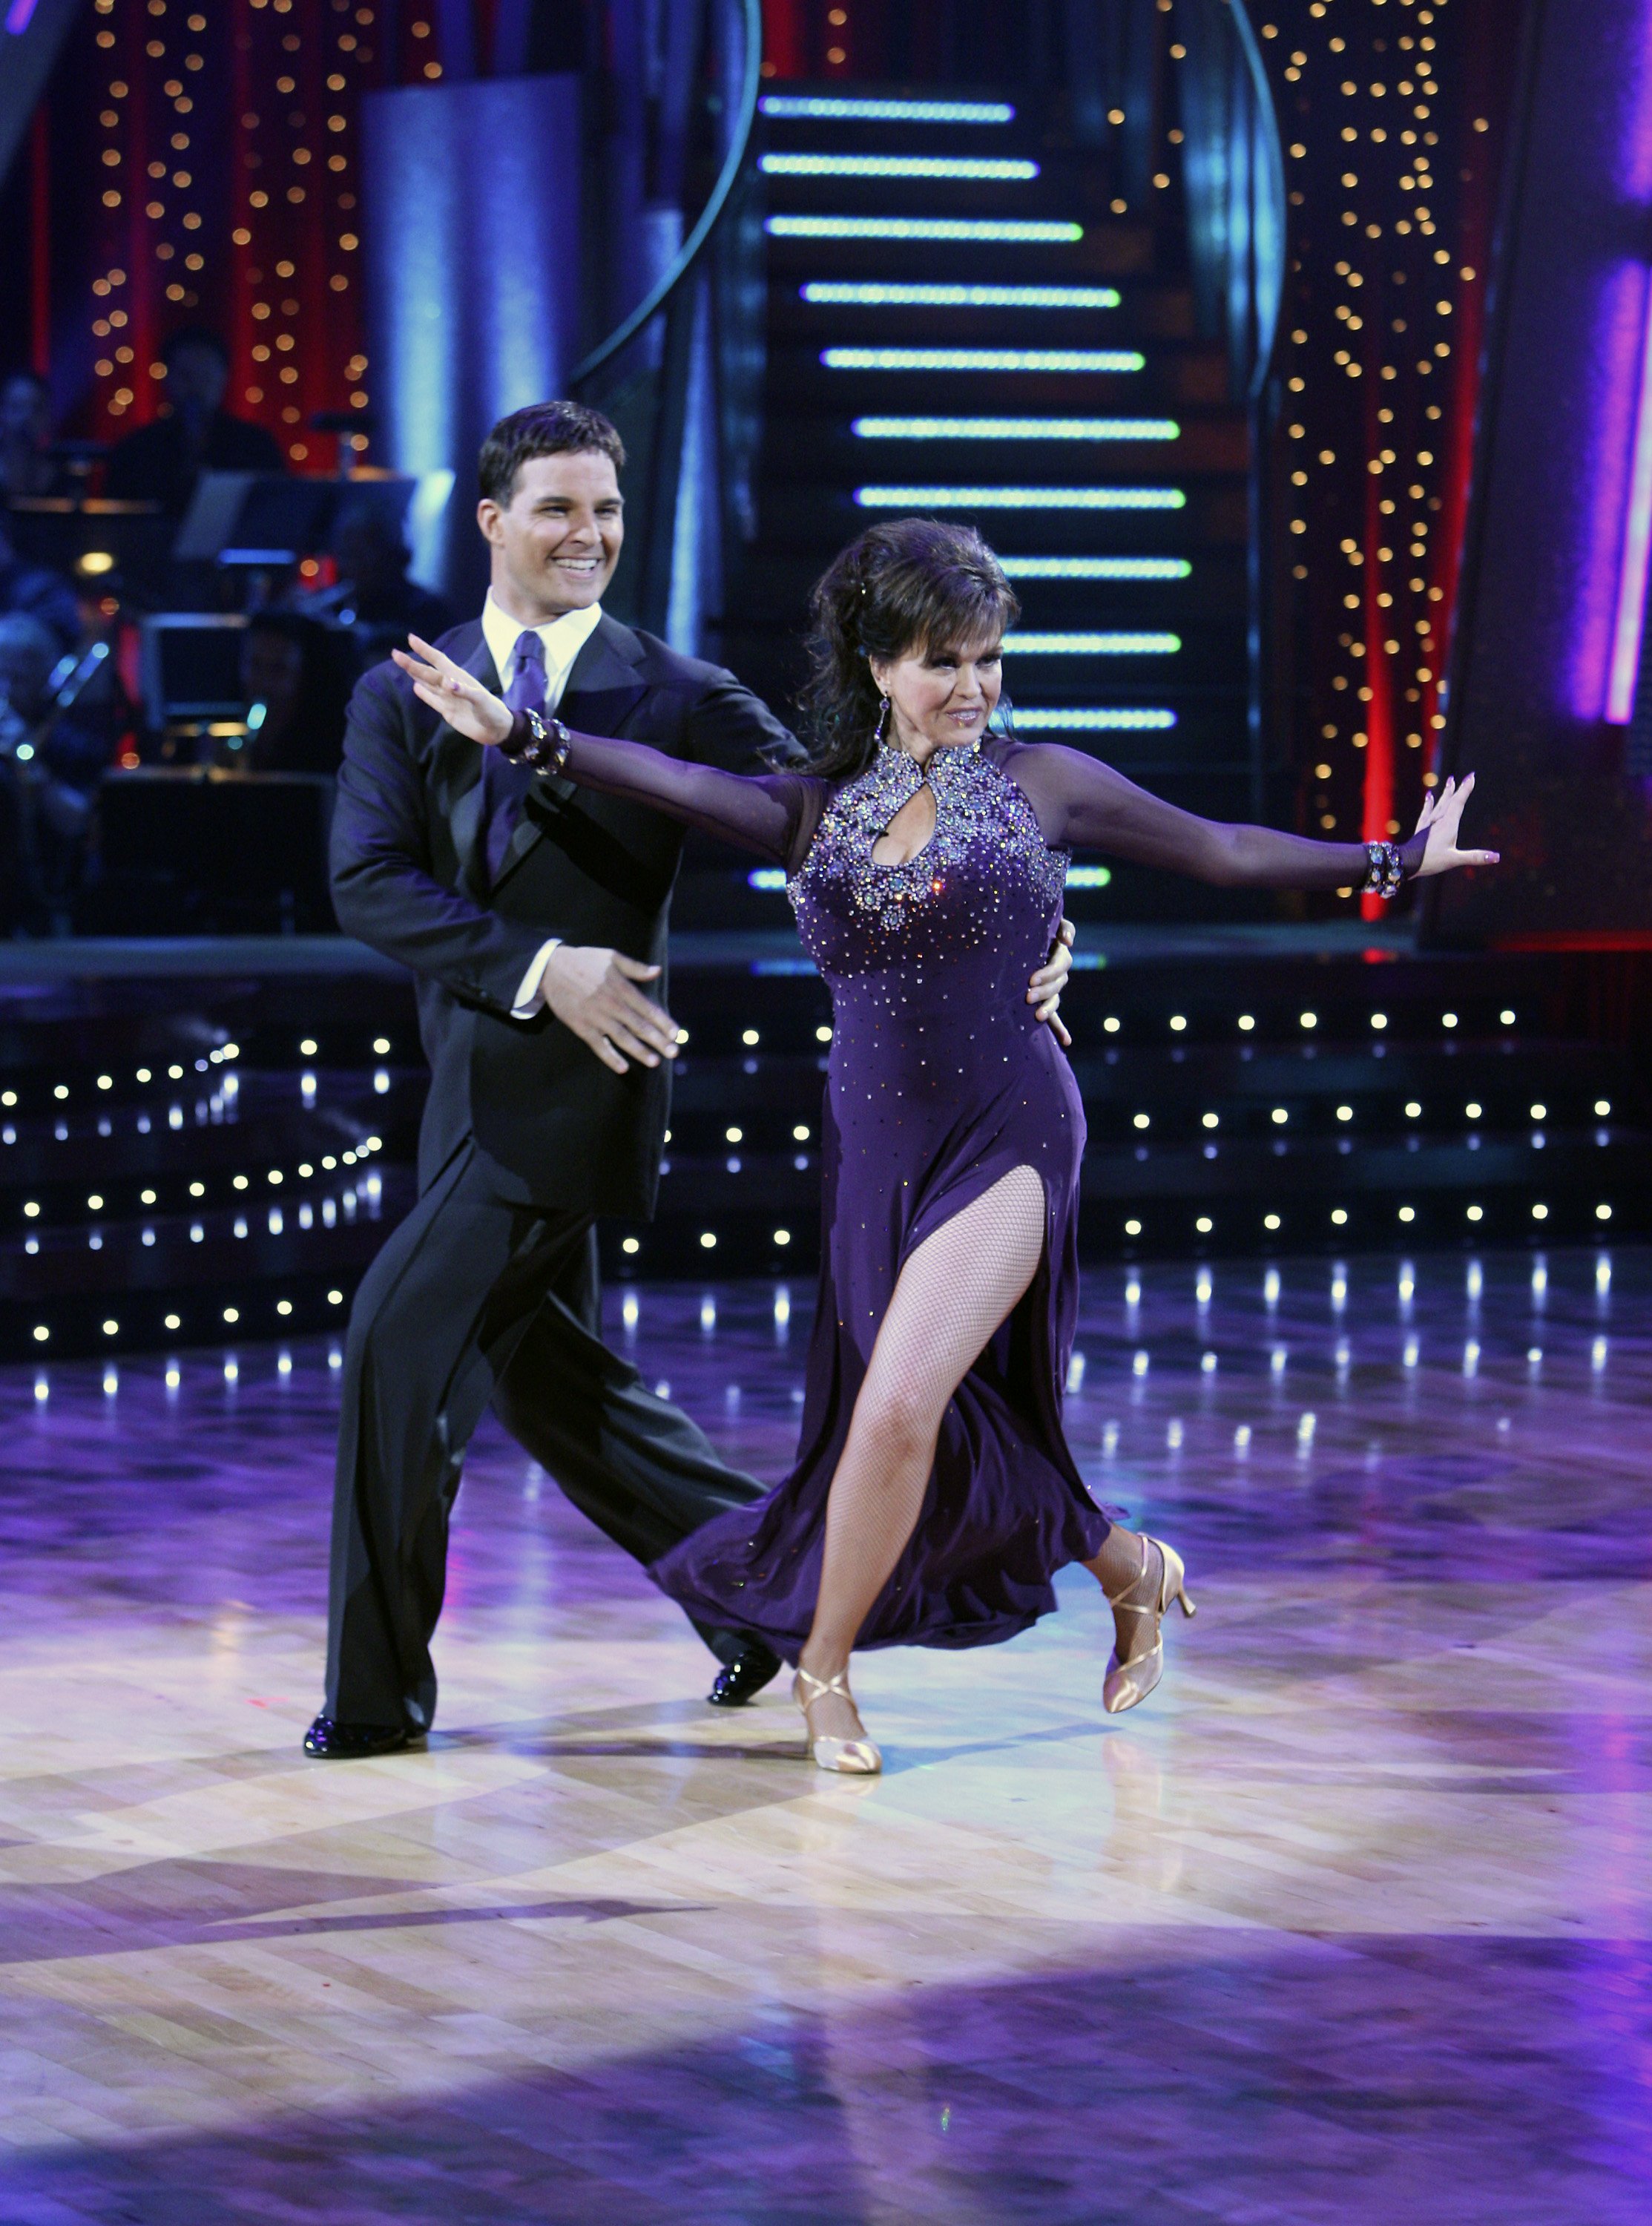 Singer Marie Osmond and her dance partner on "Dancing with The Stars" on September 24, 2007 | Source: Getty Images